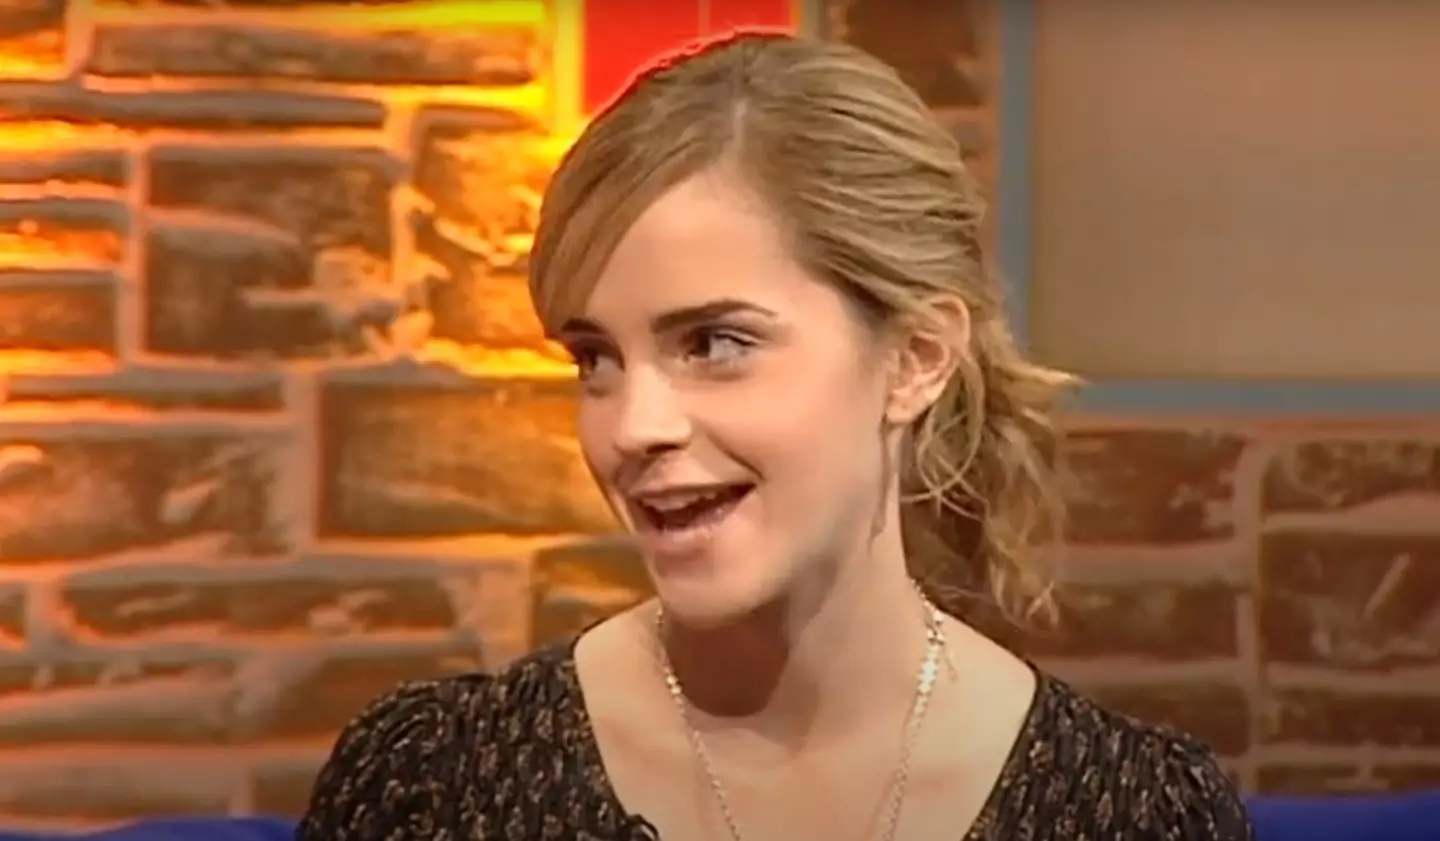 Emma Watson, pictured in 2008, was traumatised when paparazzi invaded her privacy on her 18th birthday.